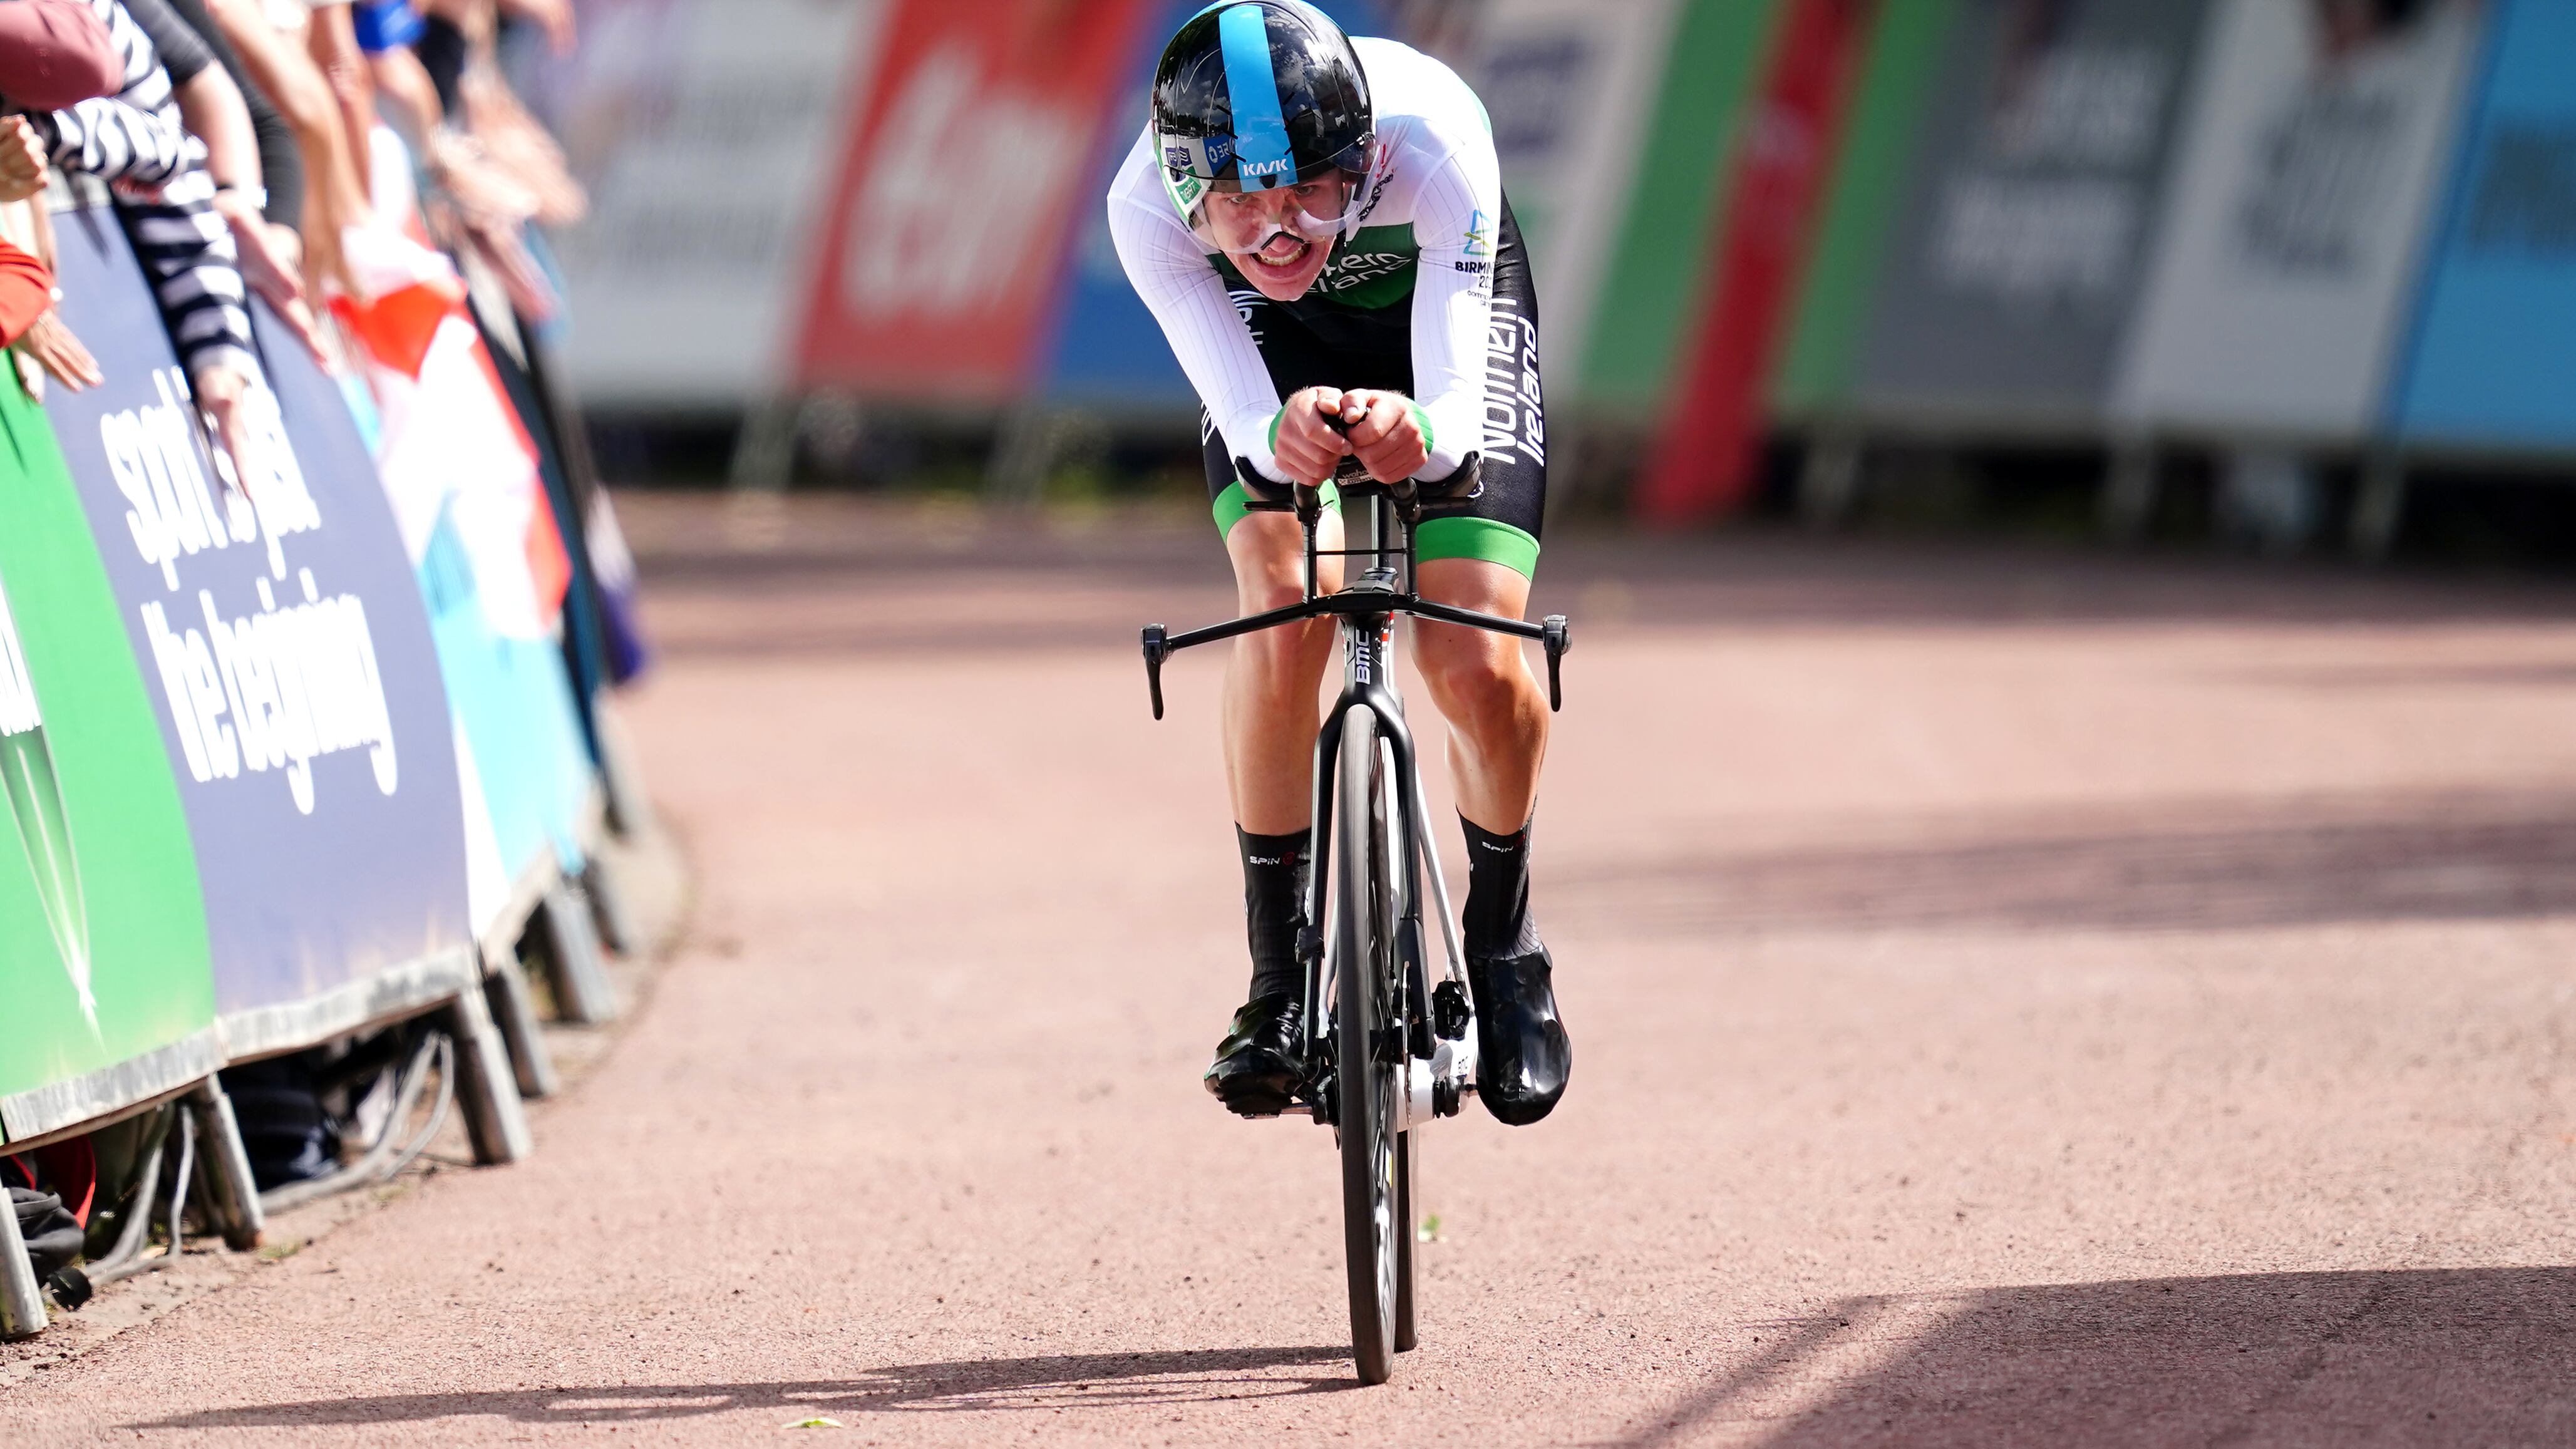 Northern Ireland's Darren Rafferty at the end of the Men's Individual Time Trial Final at West Park in Wolverhampton on day seven of the 2022 Commonwealth Games. Picture date: Thursday August 4, 2022.